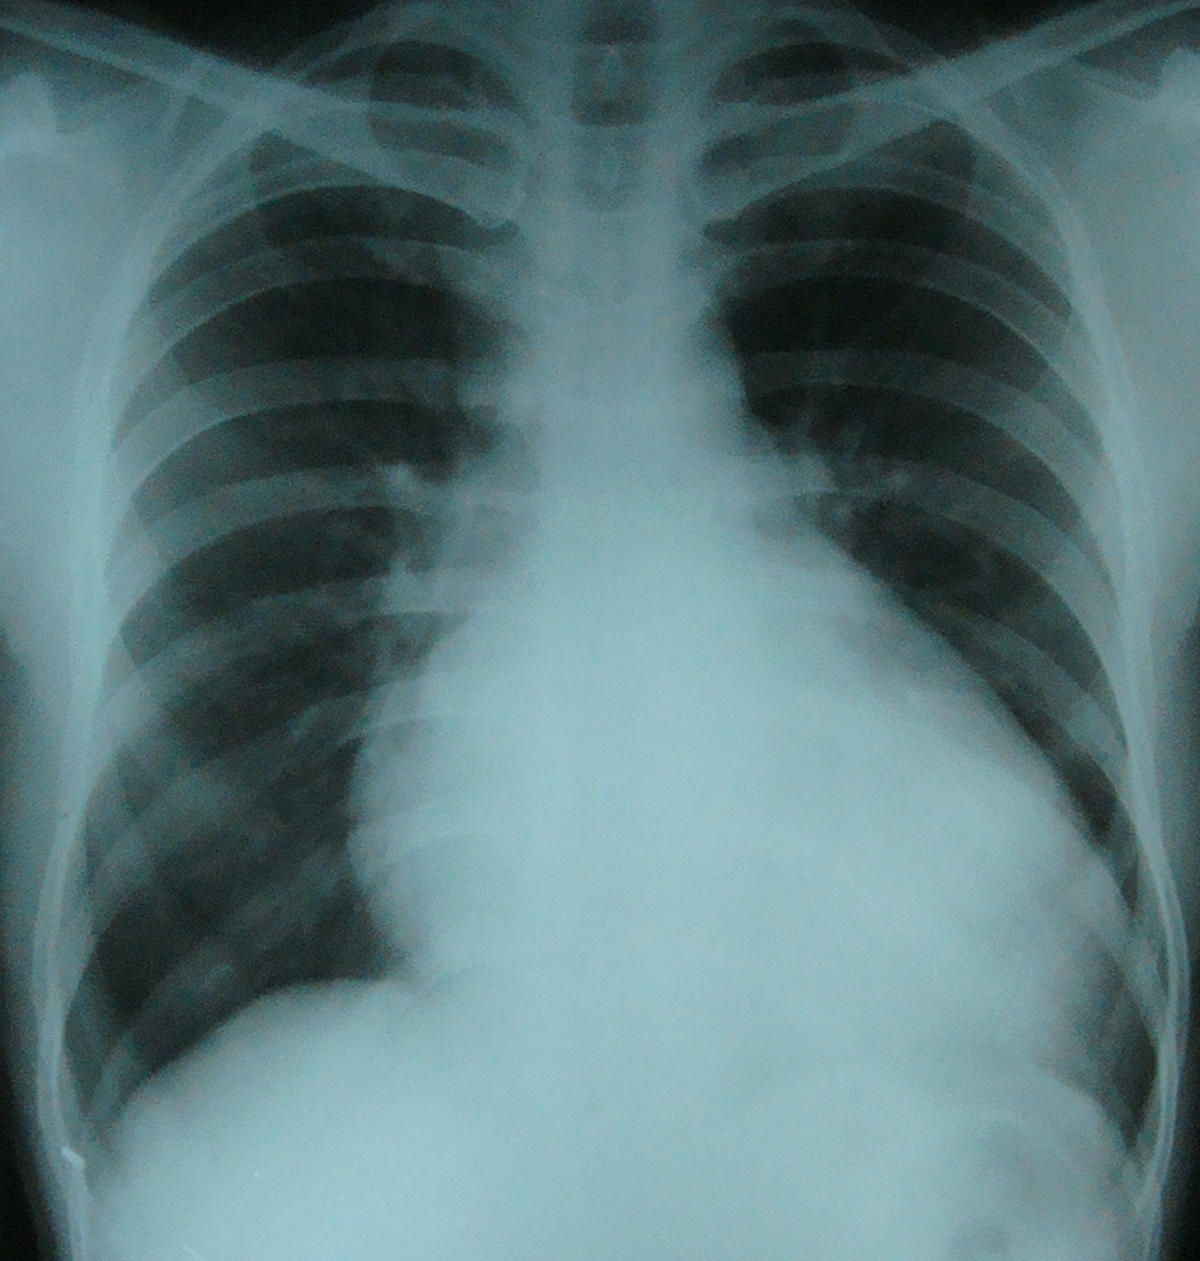 Cardiomegaly due to LV dysfunction on X-ray chest PA view